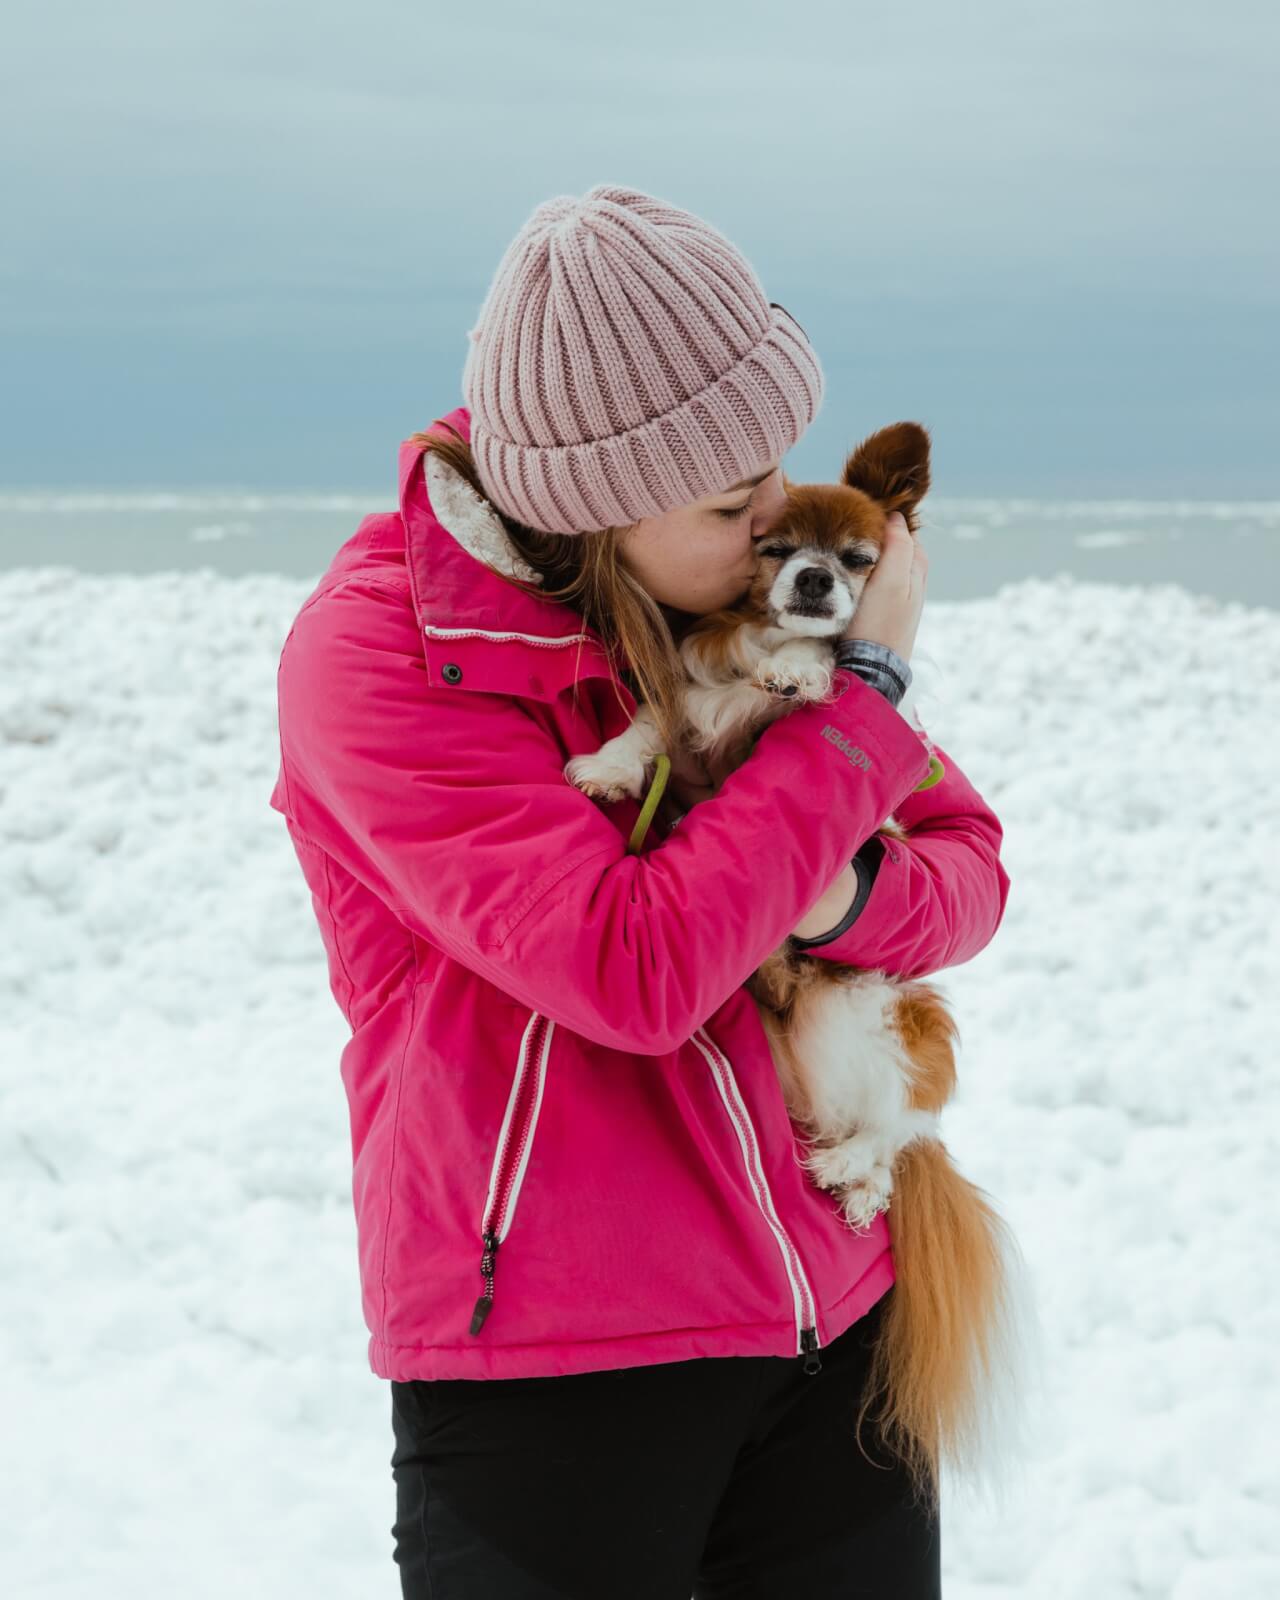 GIRL WITH DOG IN THE WINTER